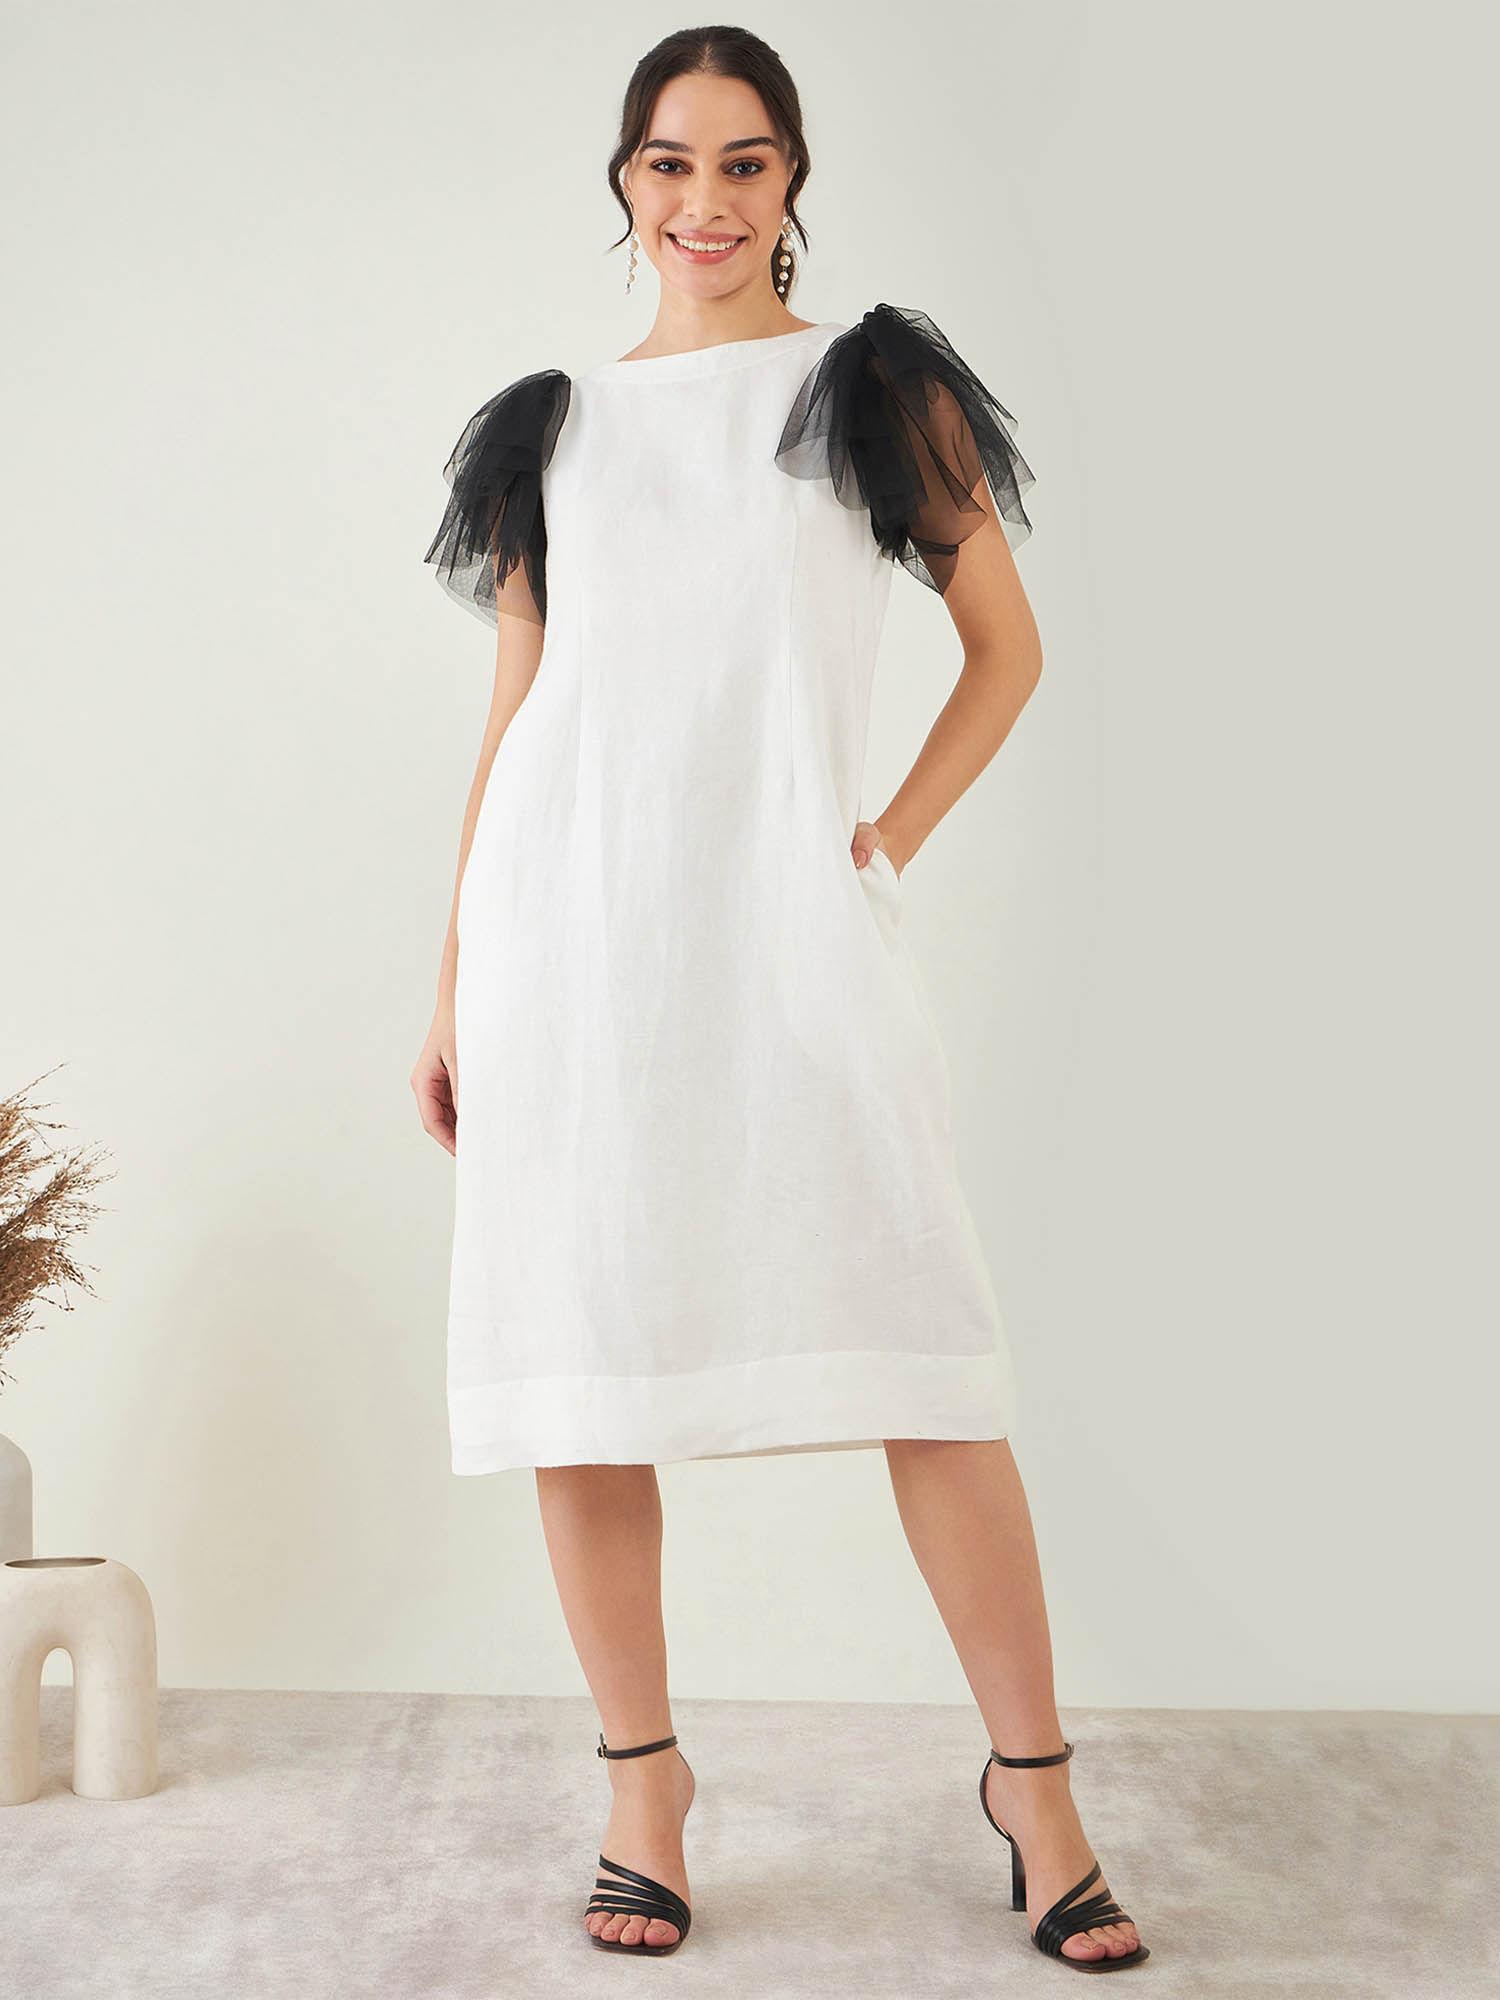 off-white linen dress with black net sleeves